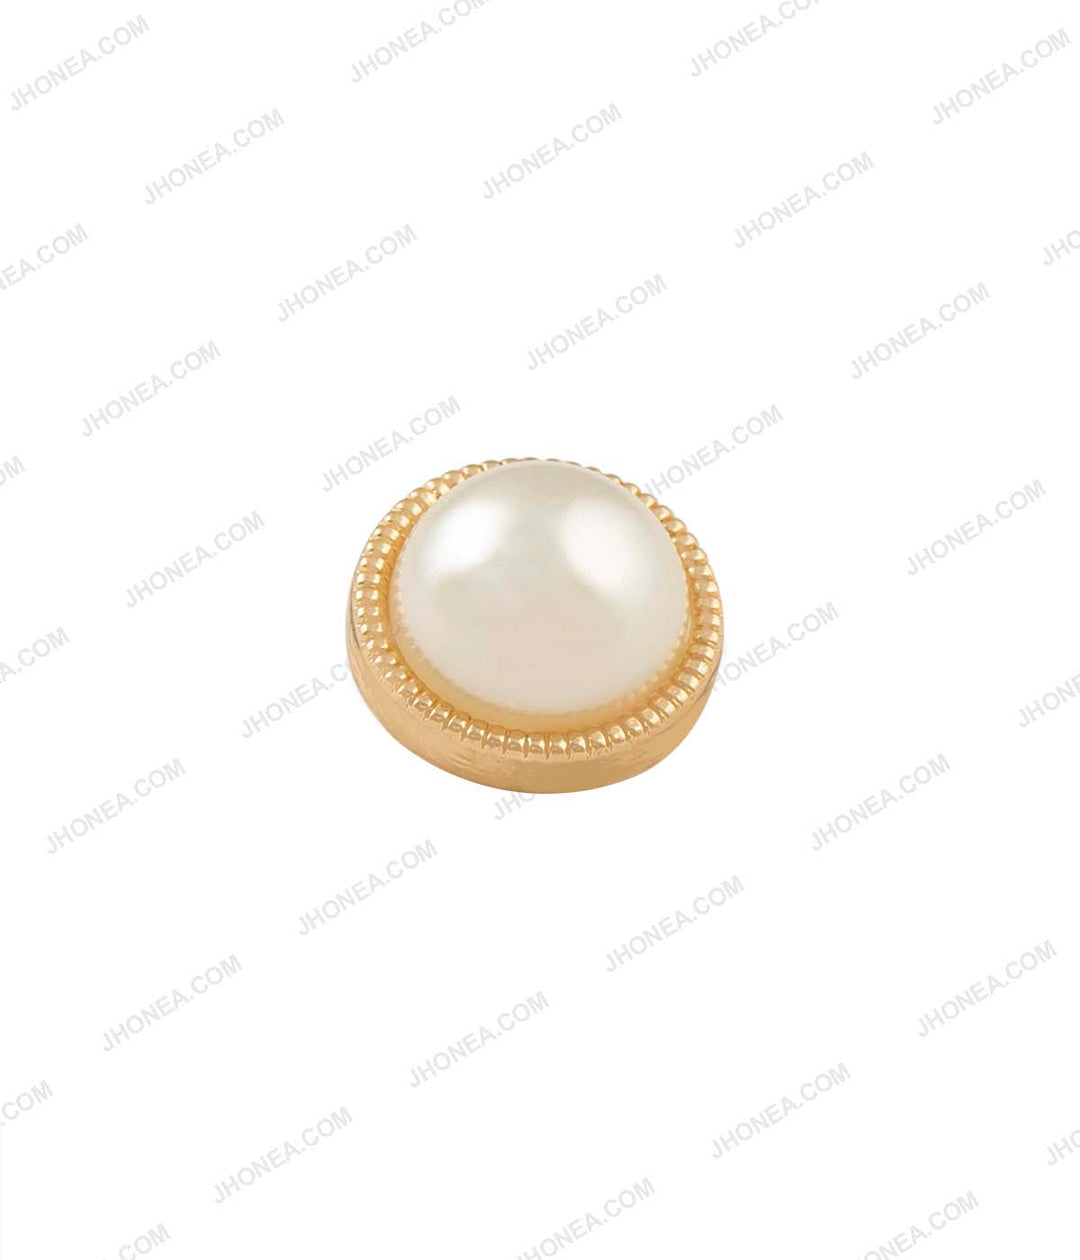 Shiny Gold & Shiny Silver Accent Border Dome Pearl Buttons